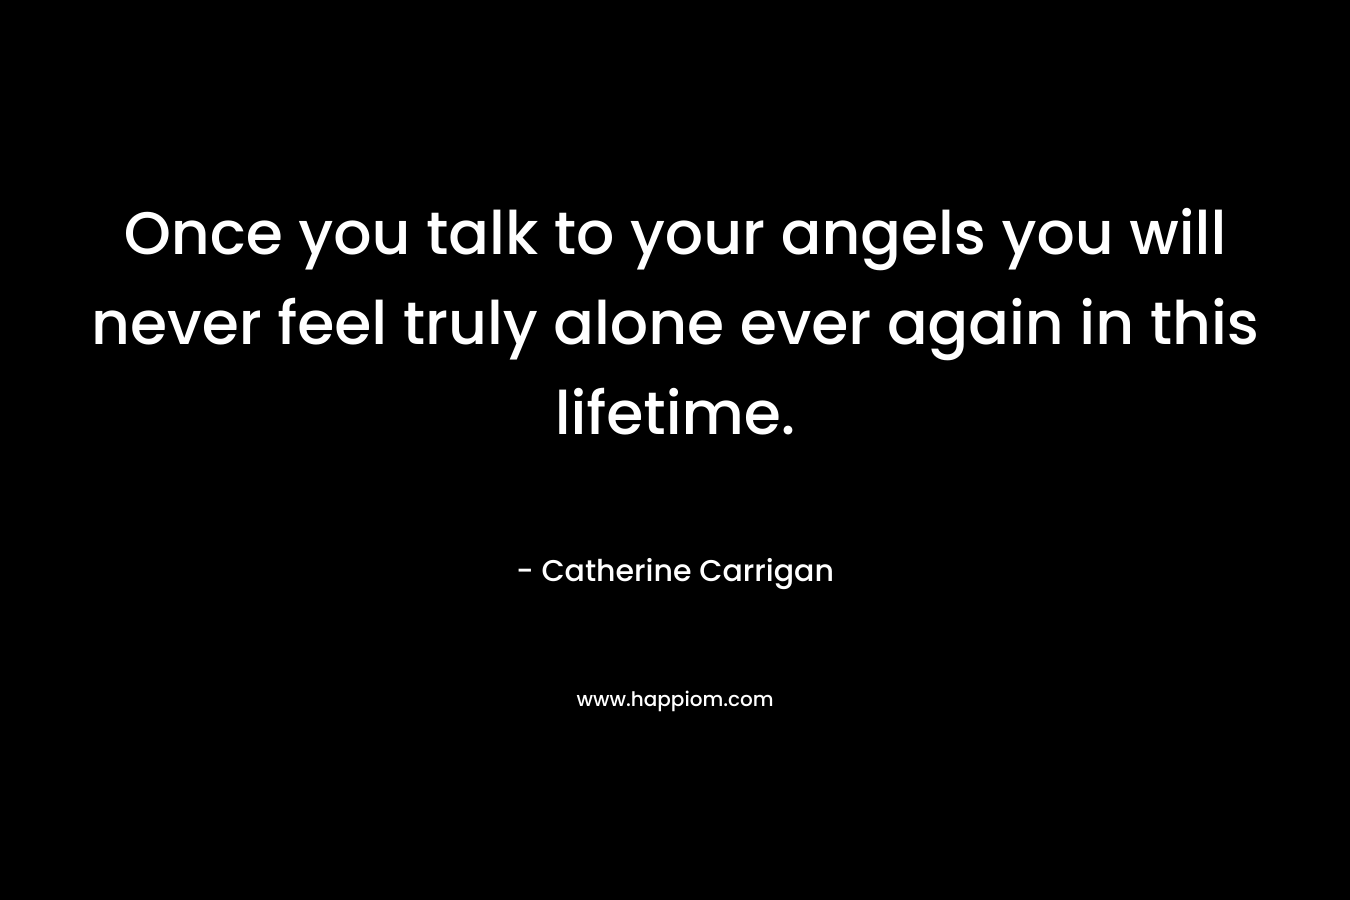 Once you talk to your angels you will never feel truly alone ever again in this lifetime. – Catherine Carrigan